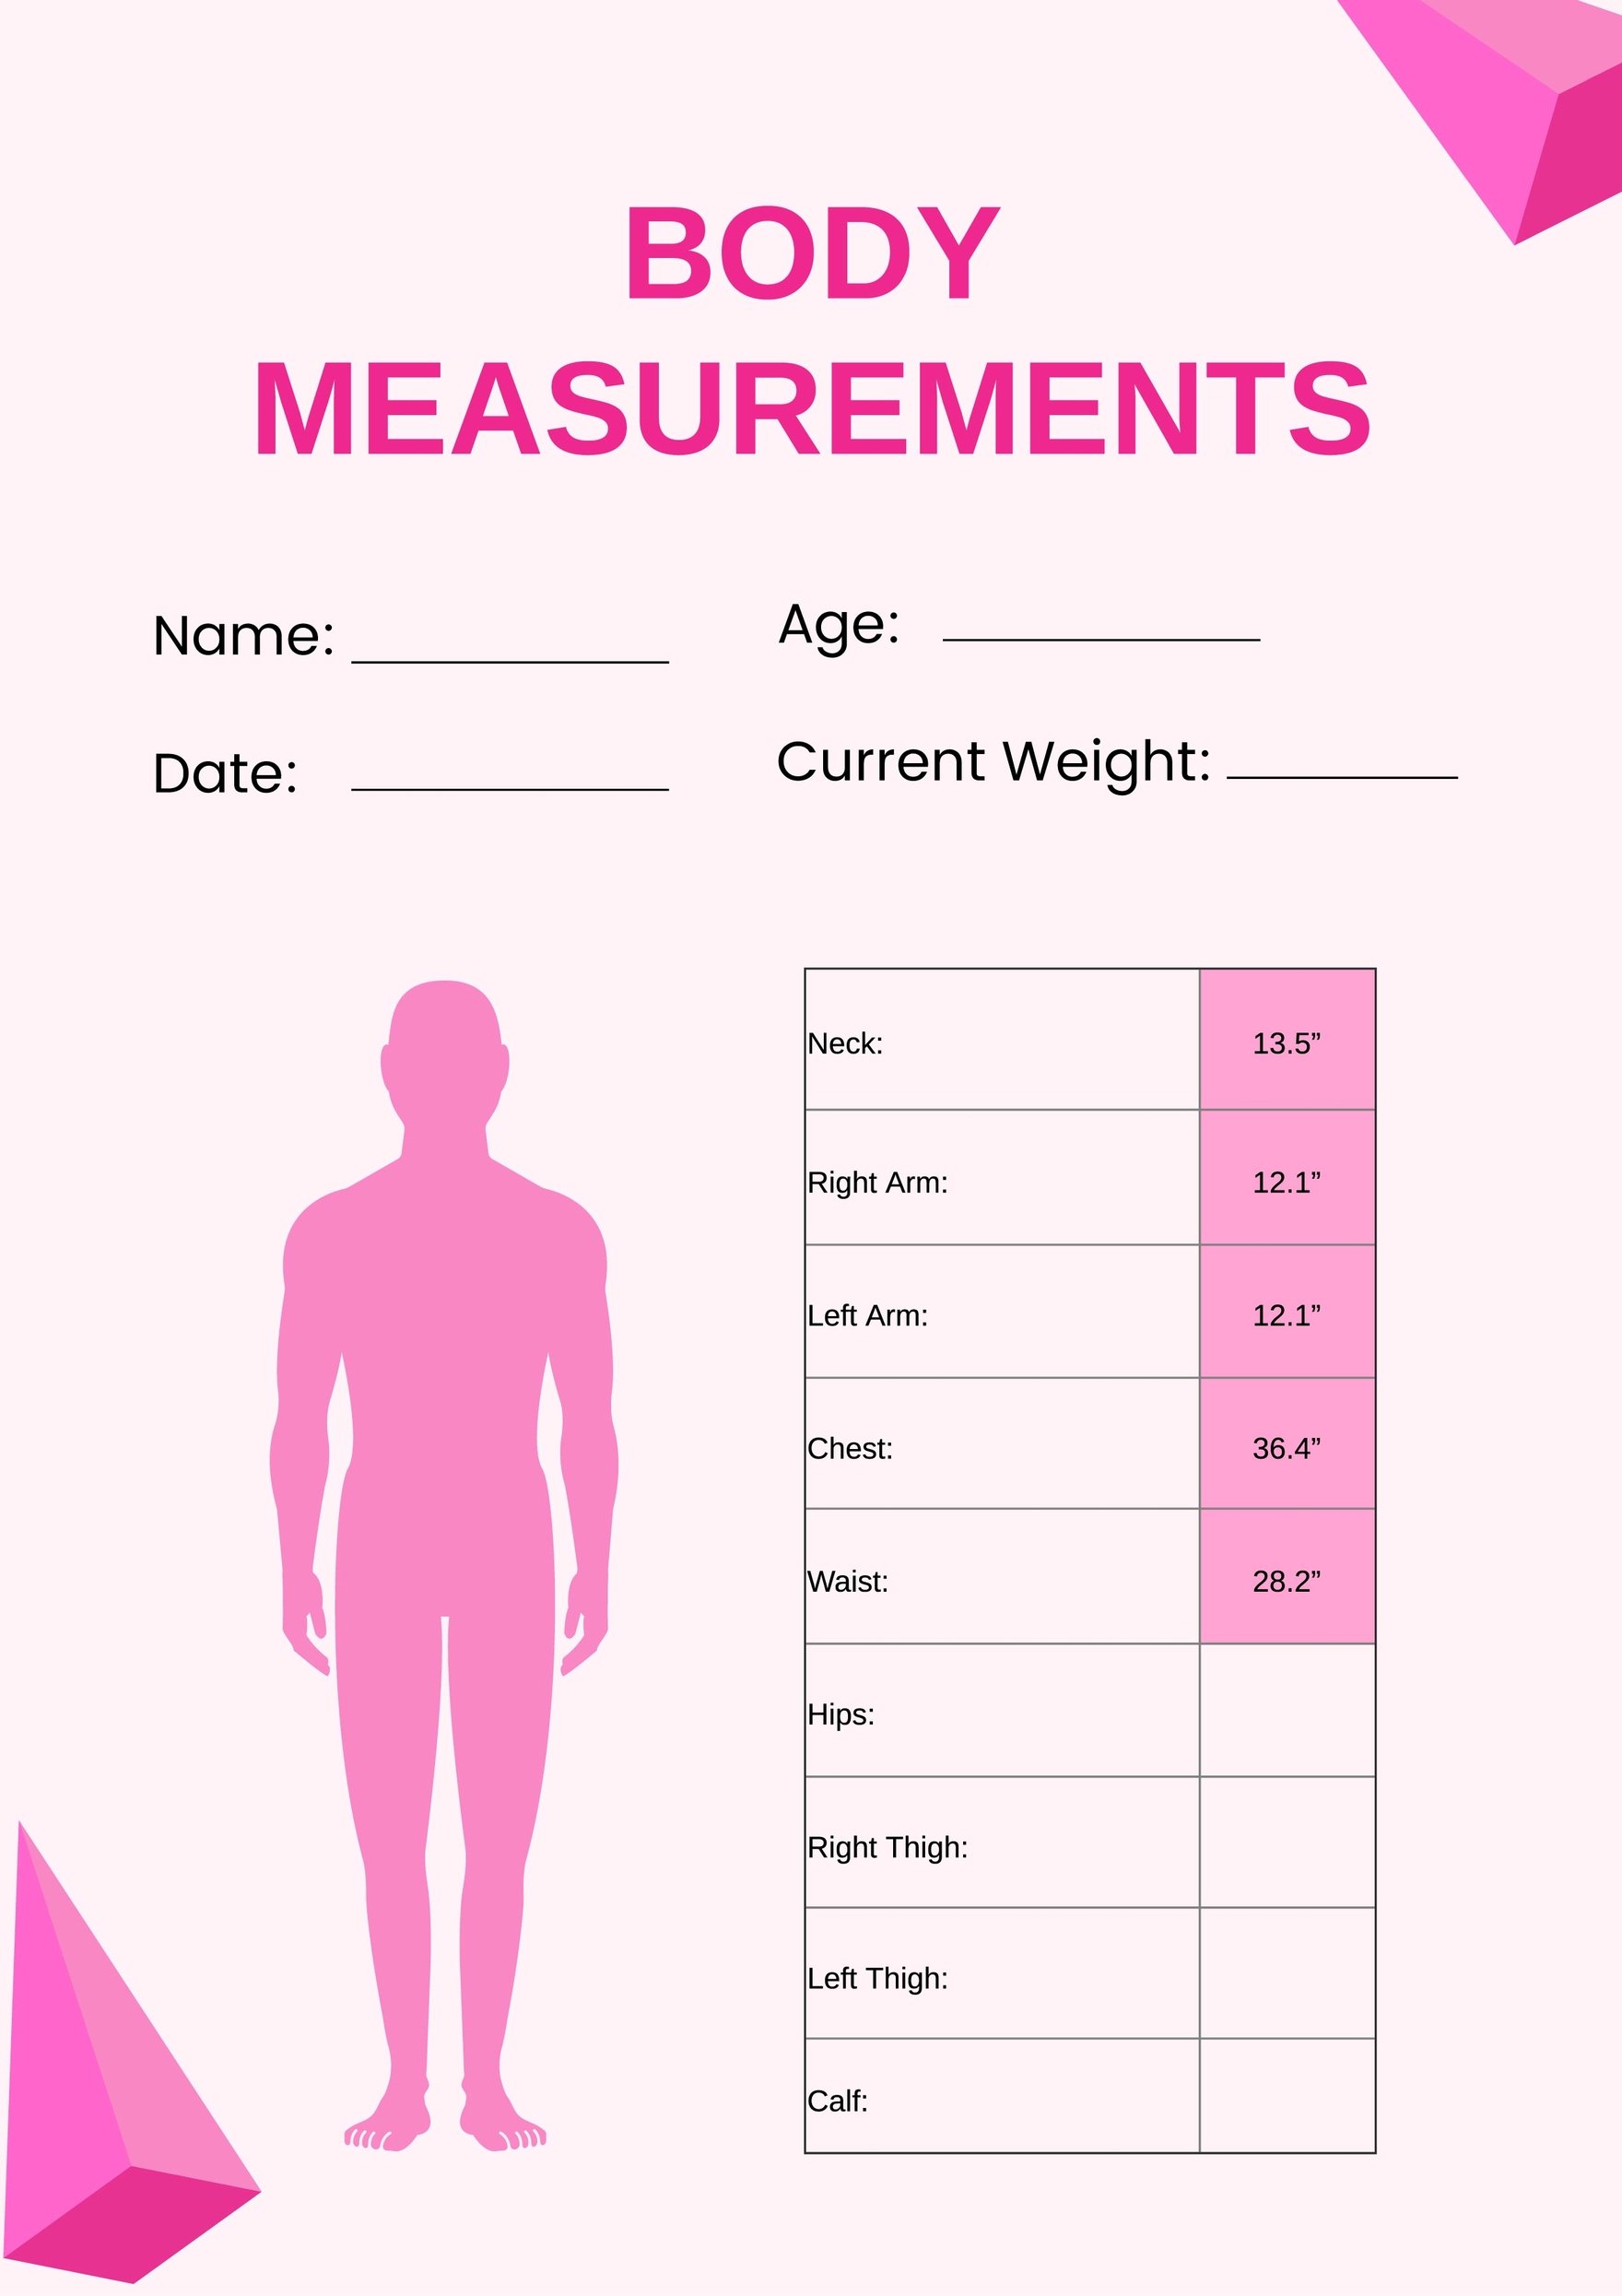 Free Printable Body Measurement Charts in PDF, PNG, and JPG Formats · InkPx